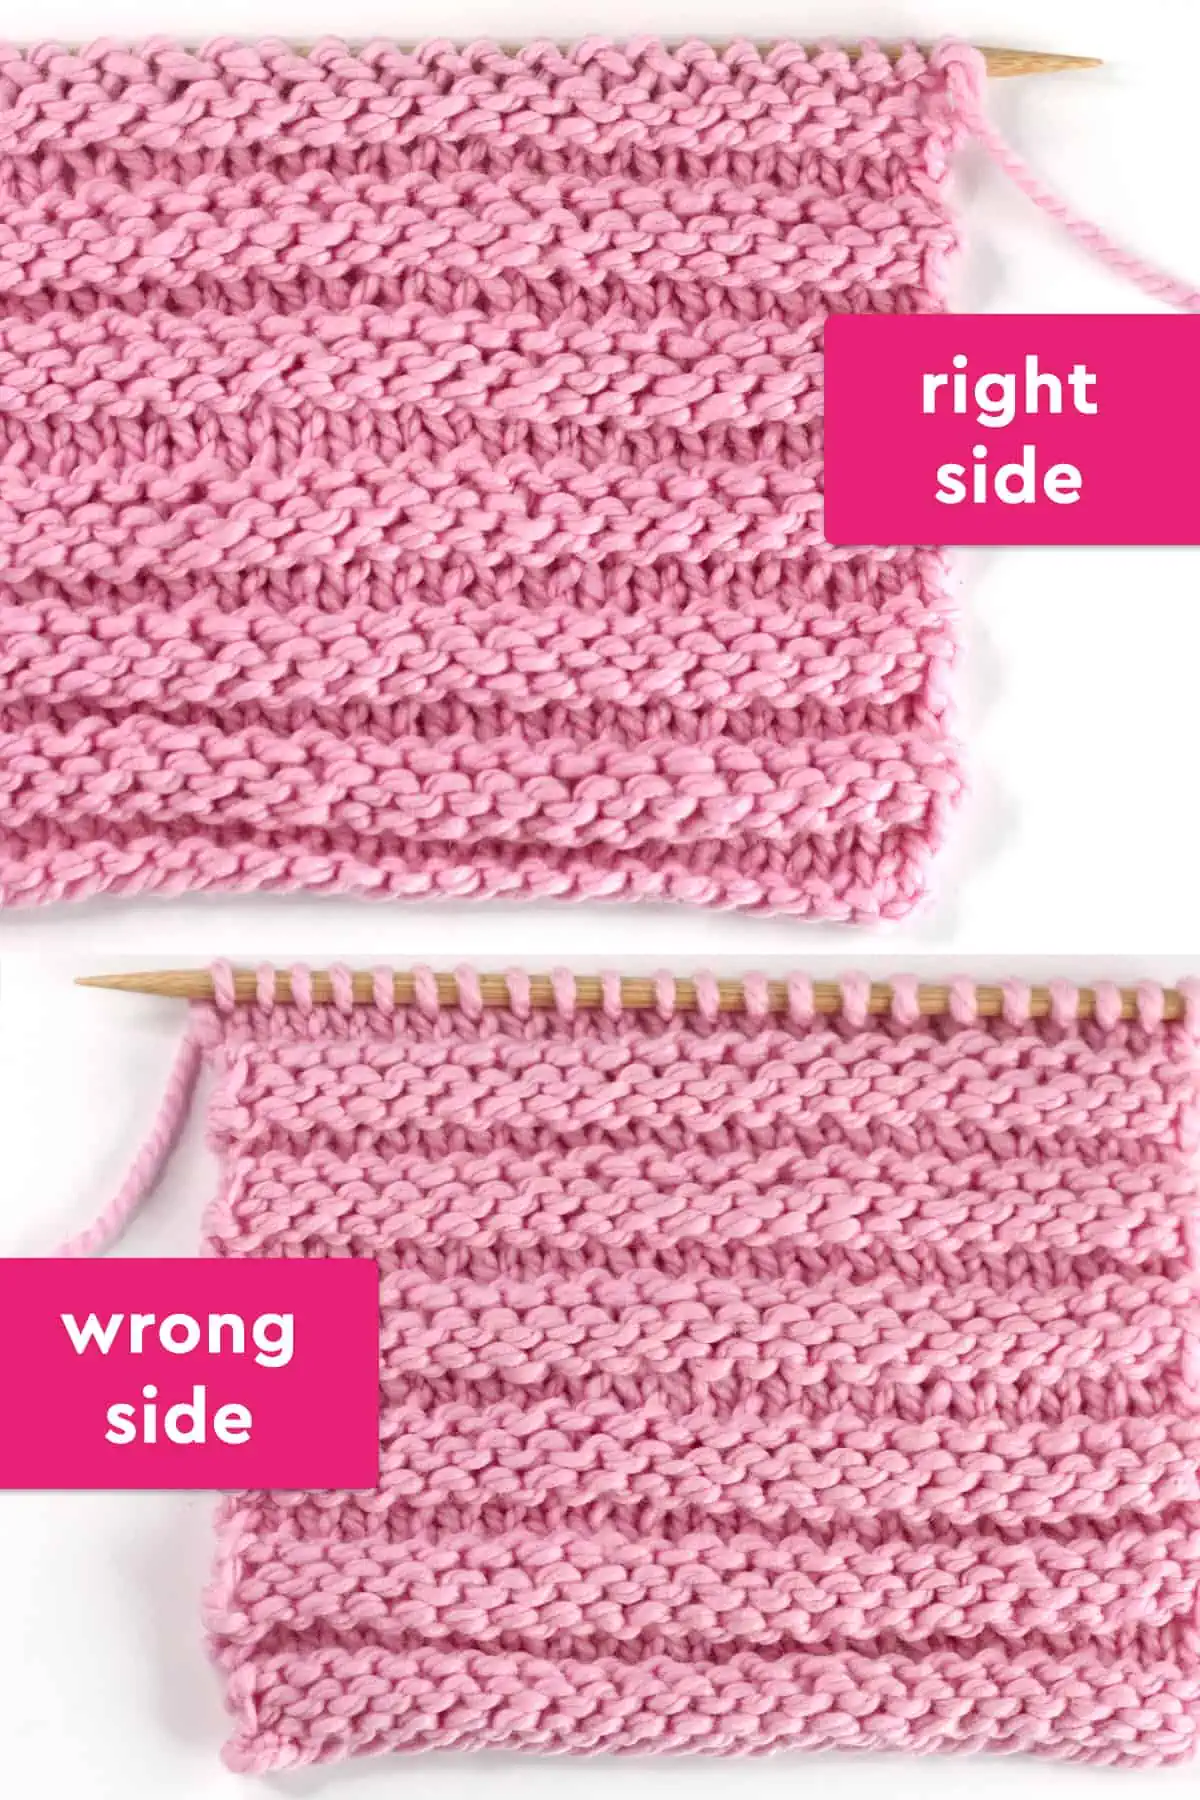 Reverse Ridge knit stitch texture on the right and wrong sides in pink yarn color on wooden needles.